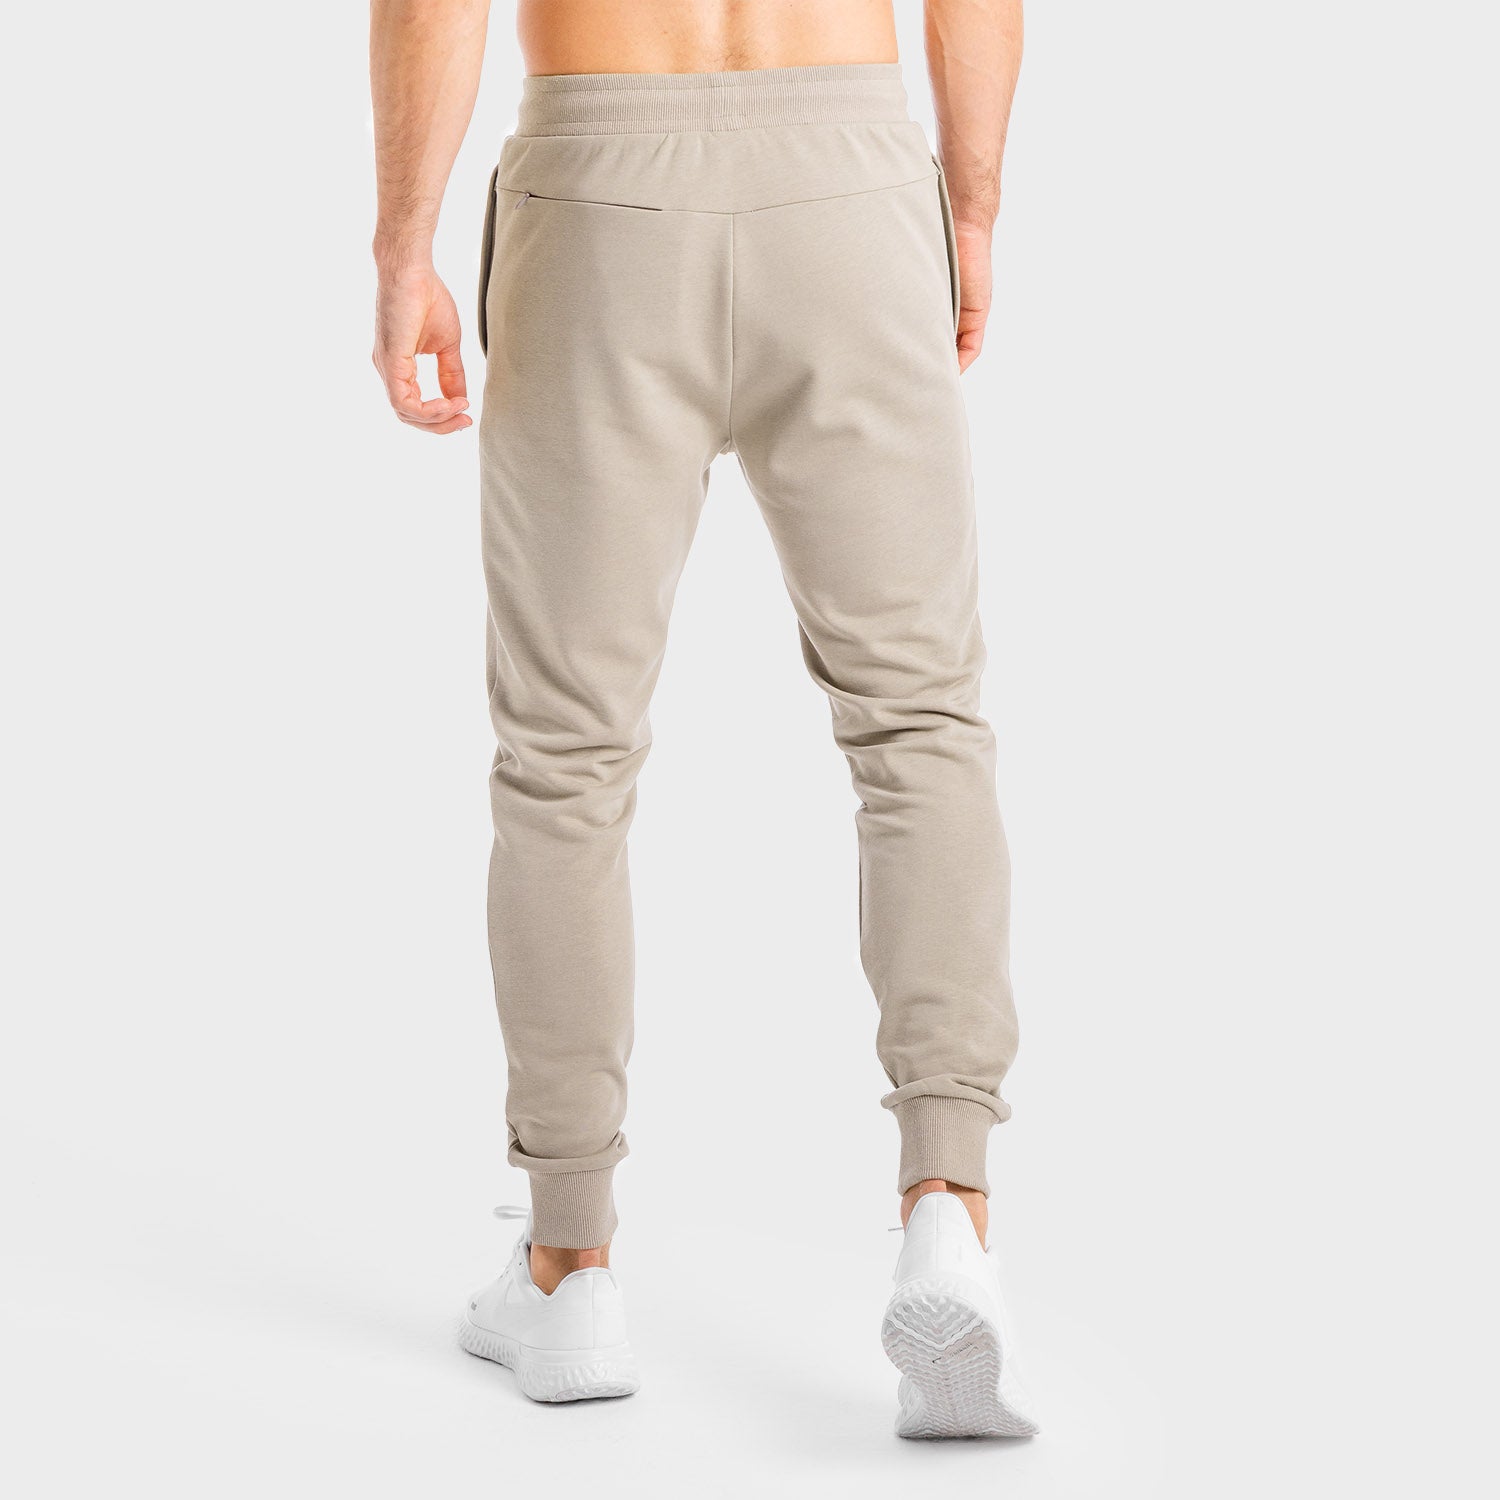 squatwolf-gym-wear-core-cuffed-joggers-taupe-workout-pants-for-men